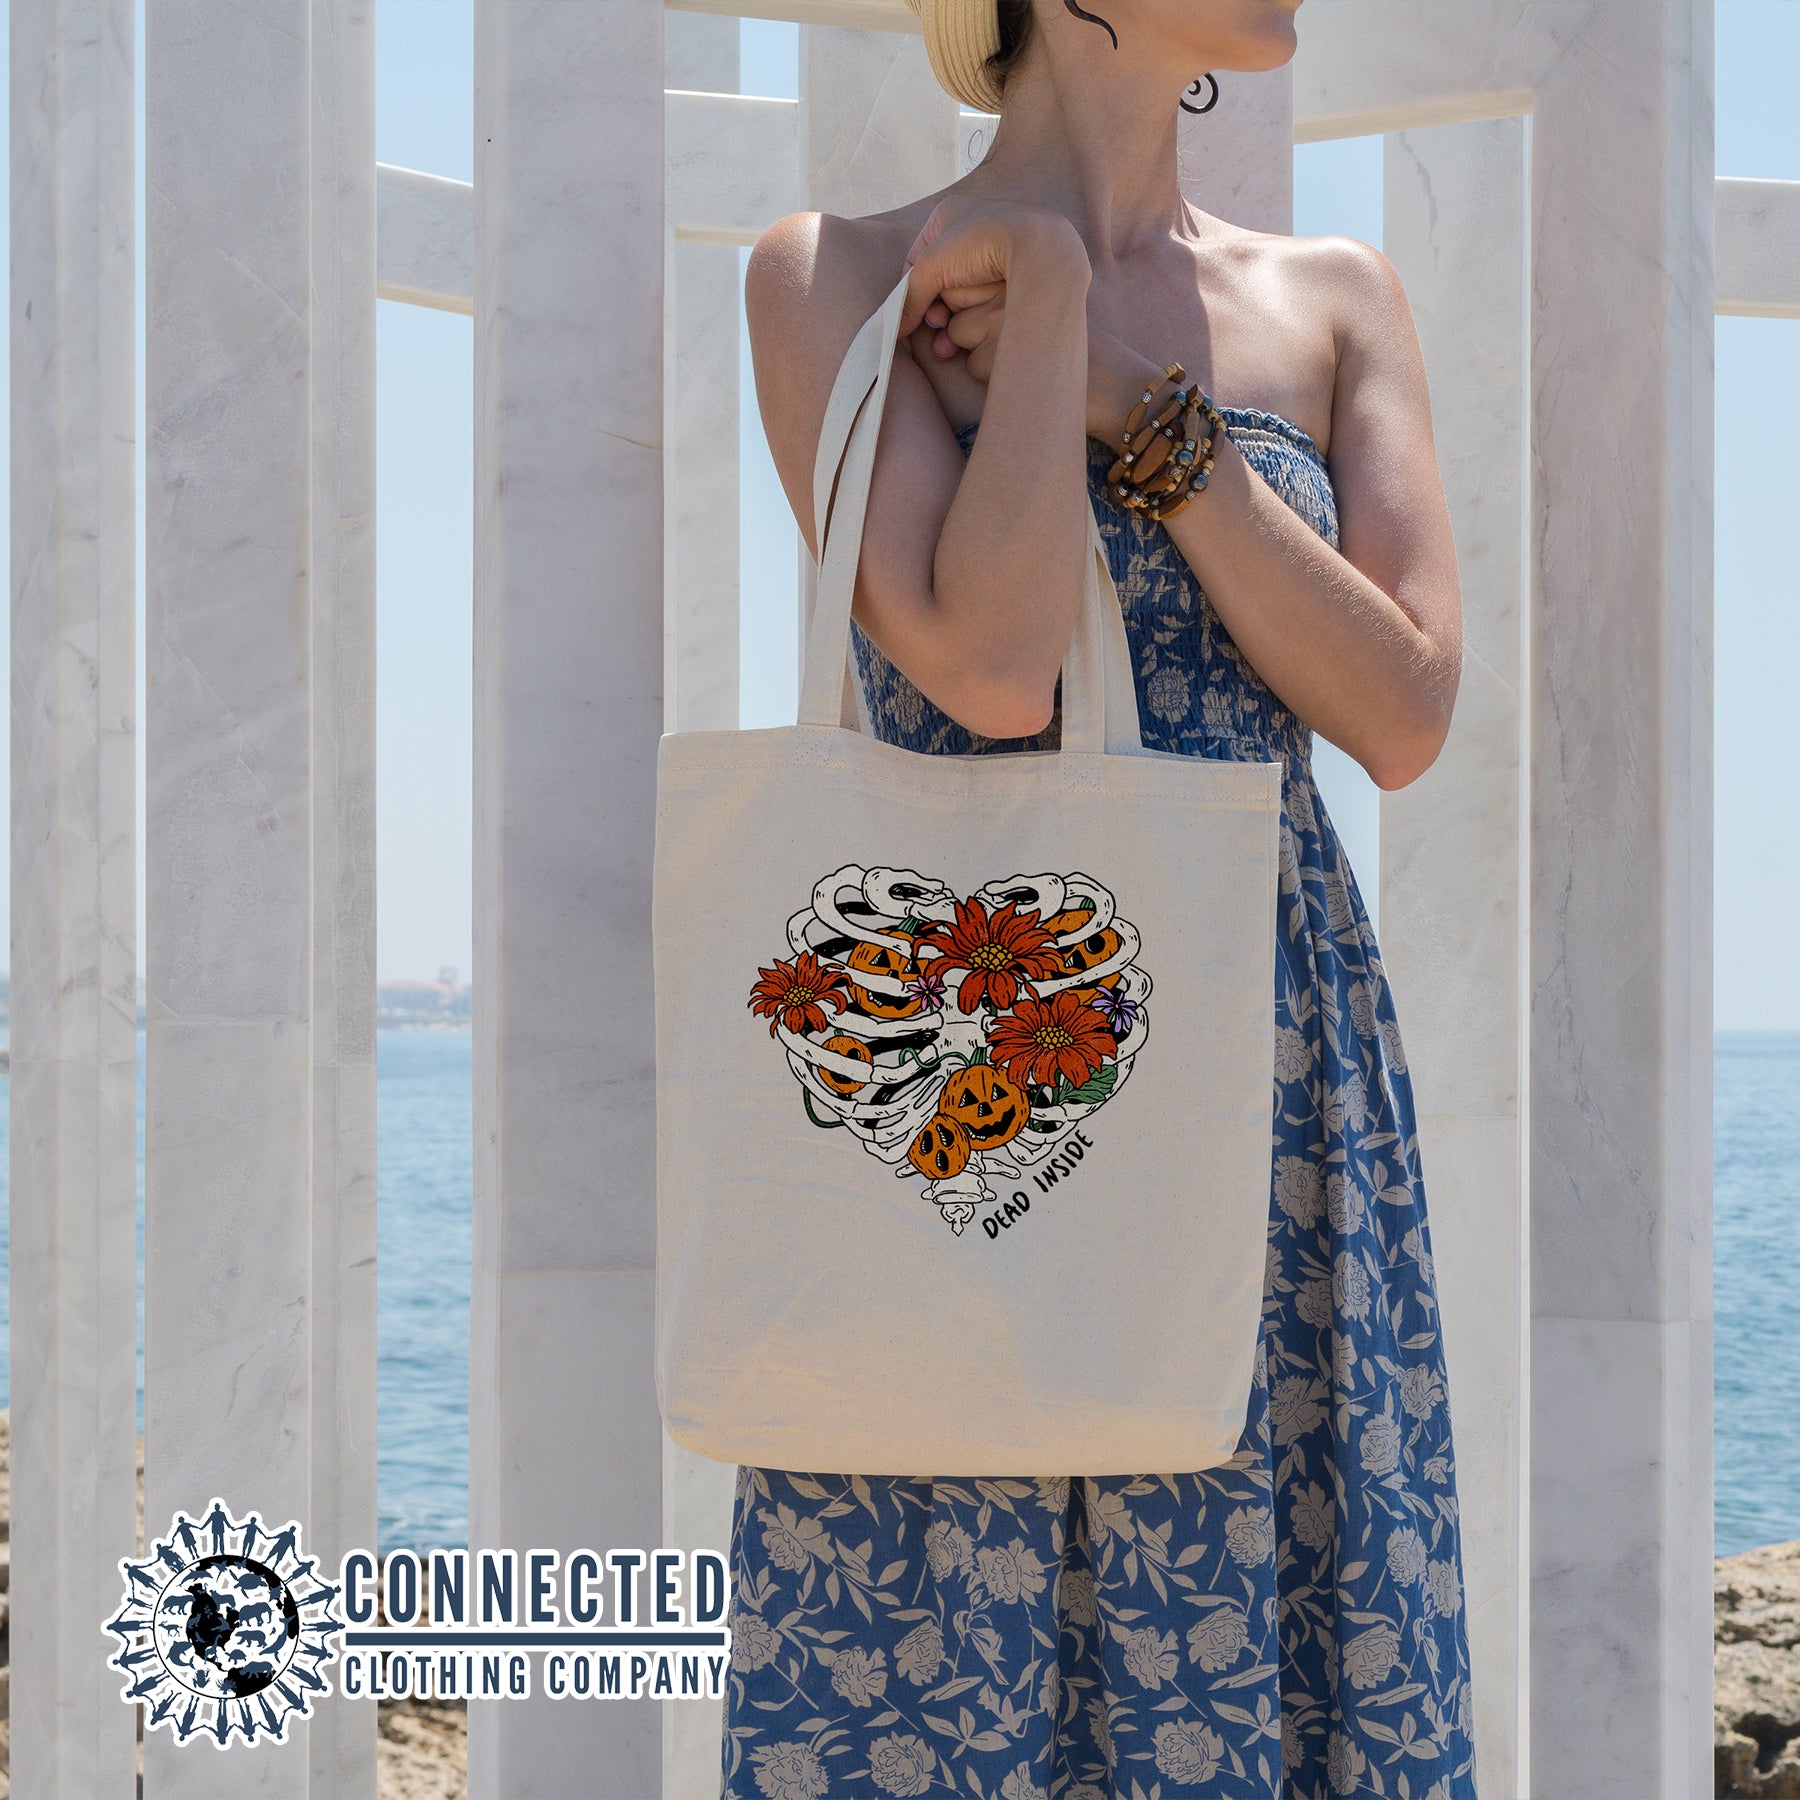 Dead Inside Tote Bag - Connected Clothing Company - 10% of proceeds donated to ocean conservation